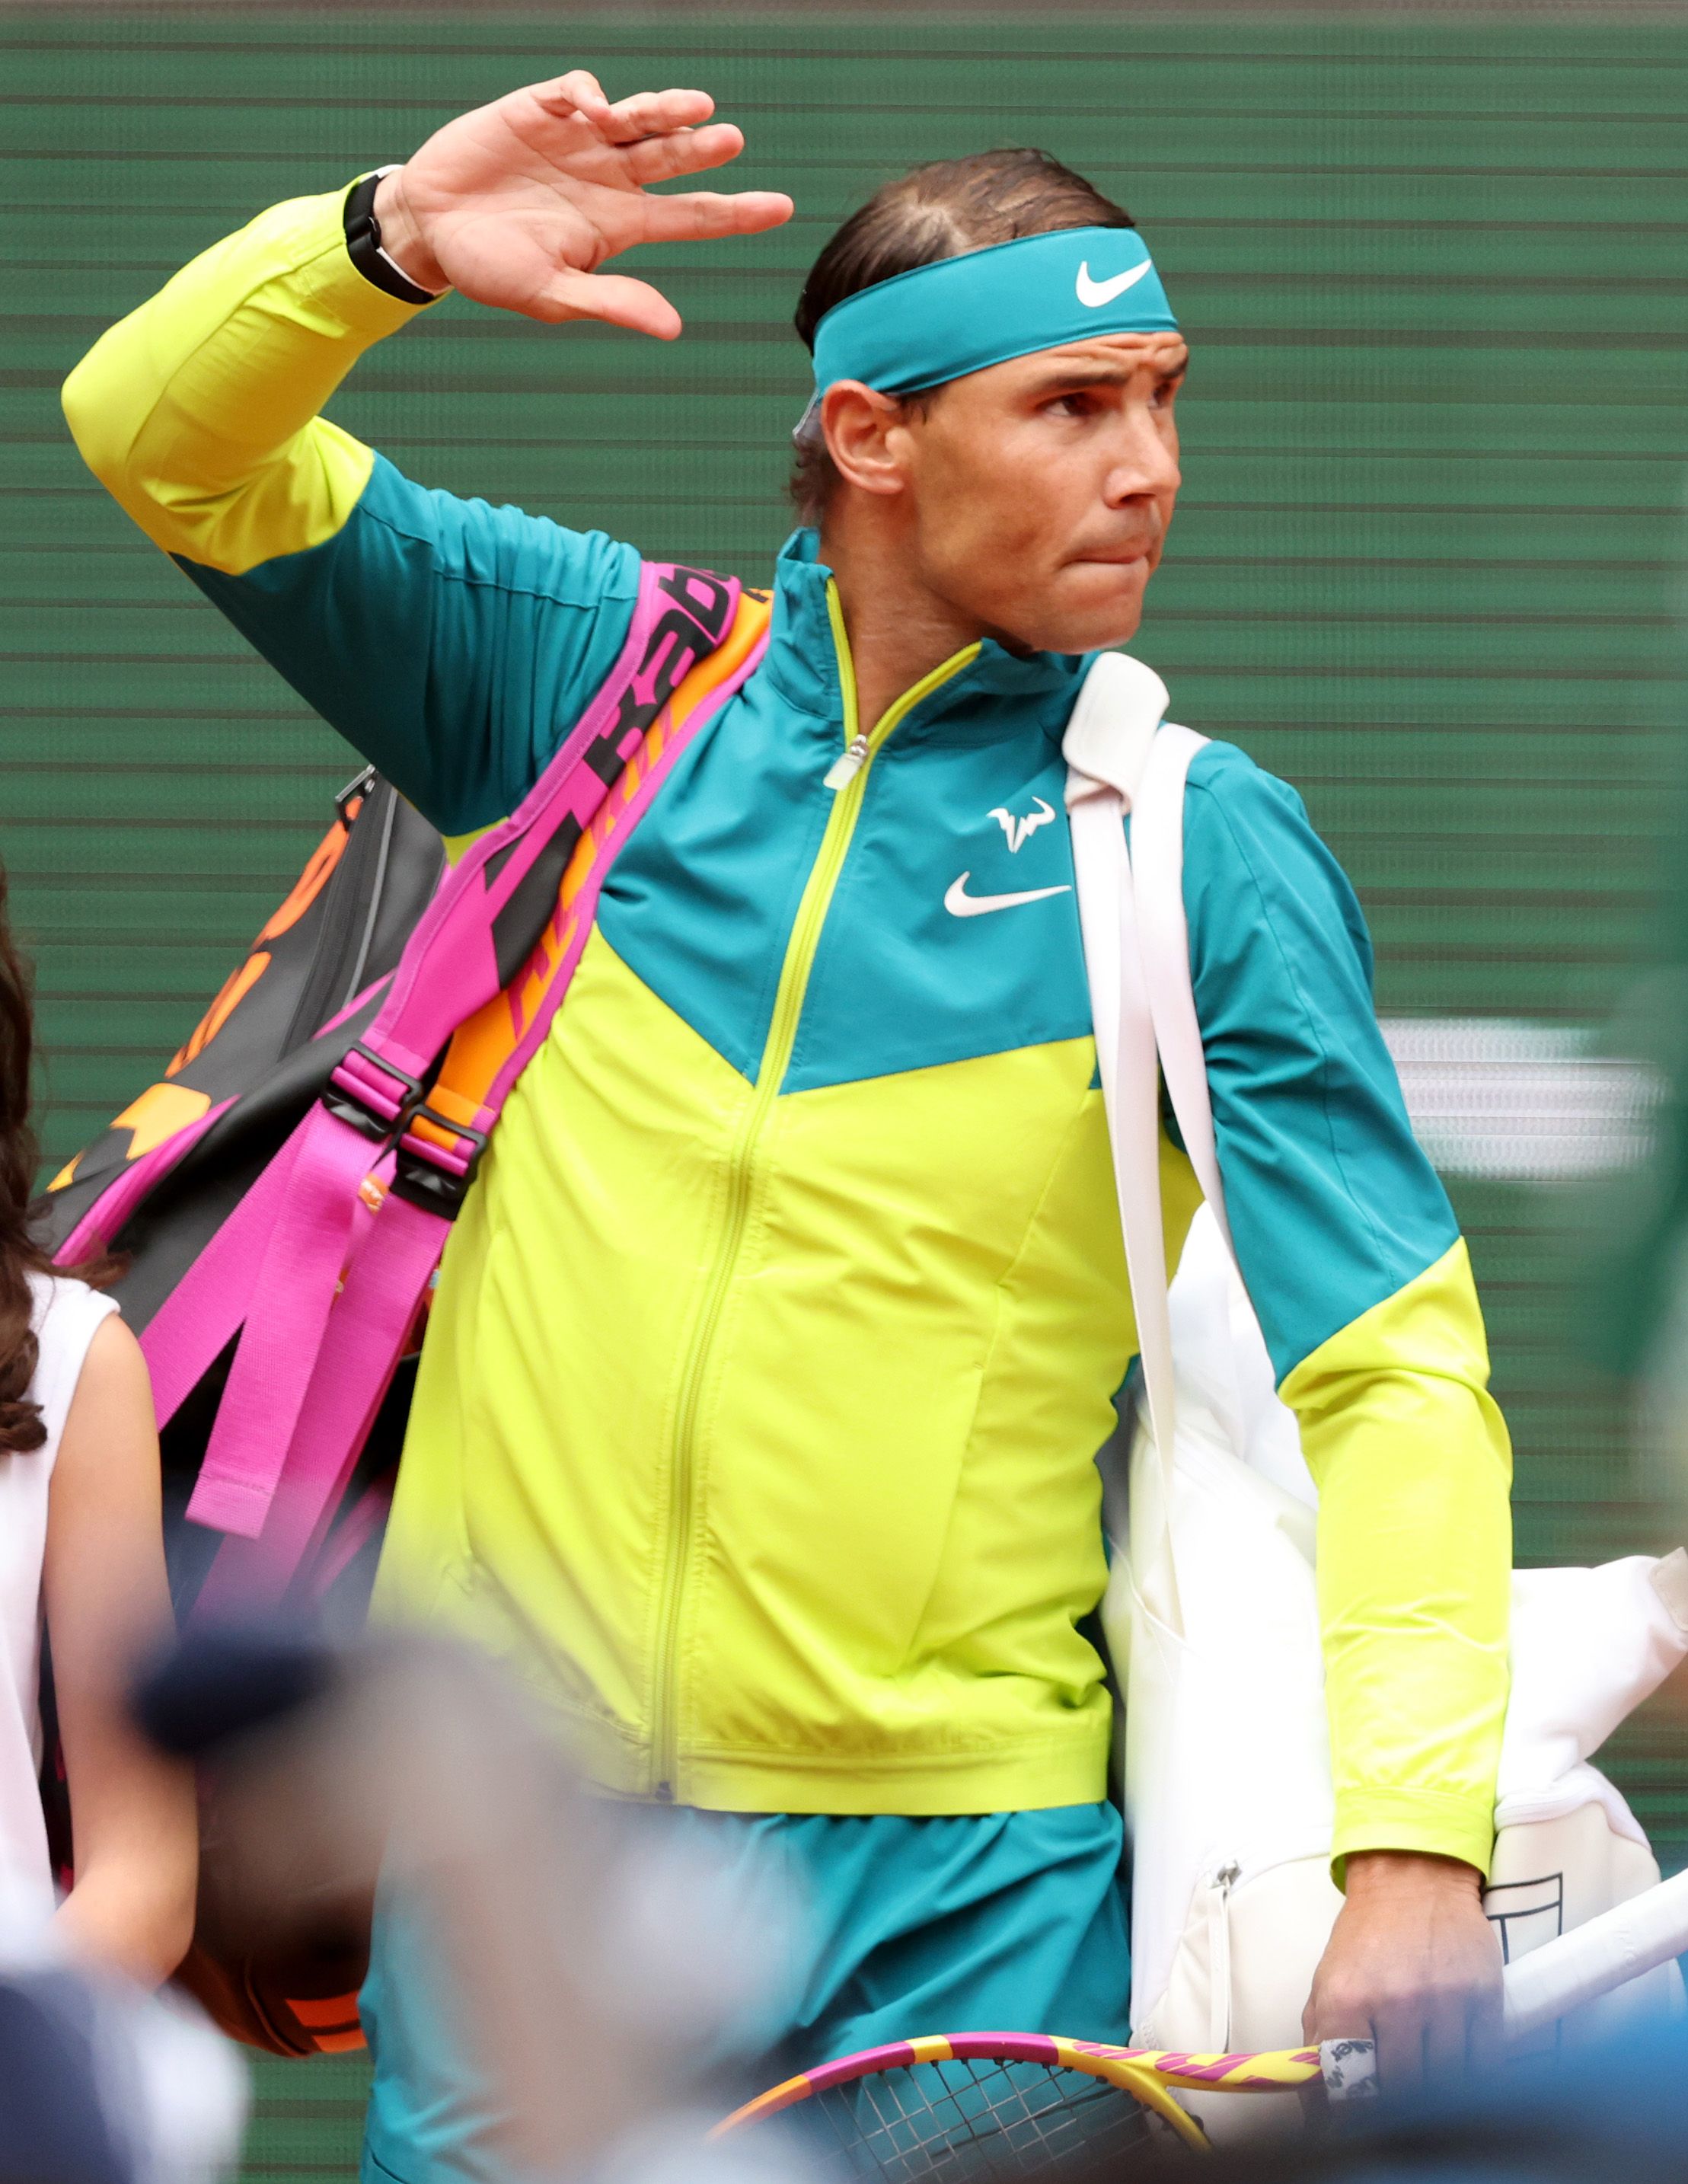 Rafael Nadal: How much did he earn from French Open win?